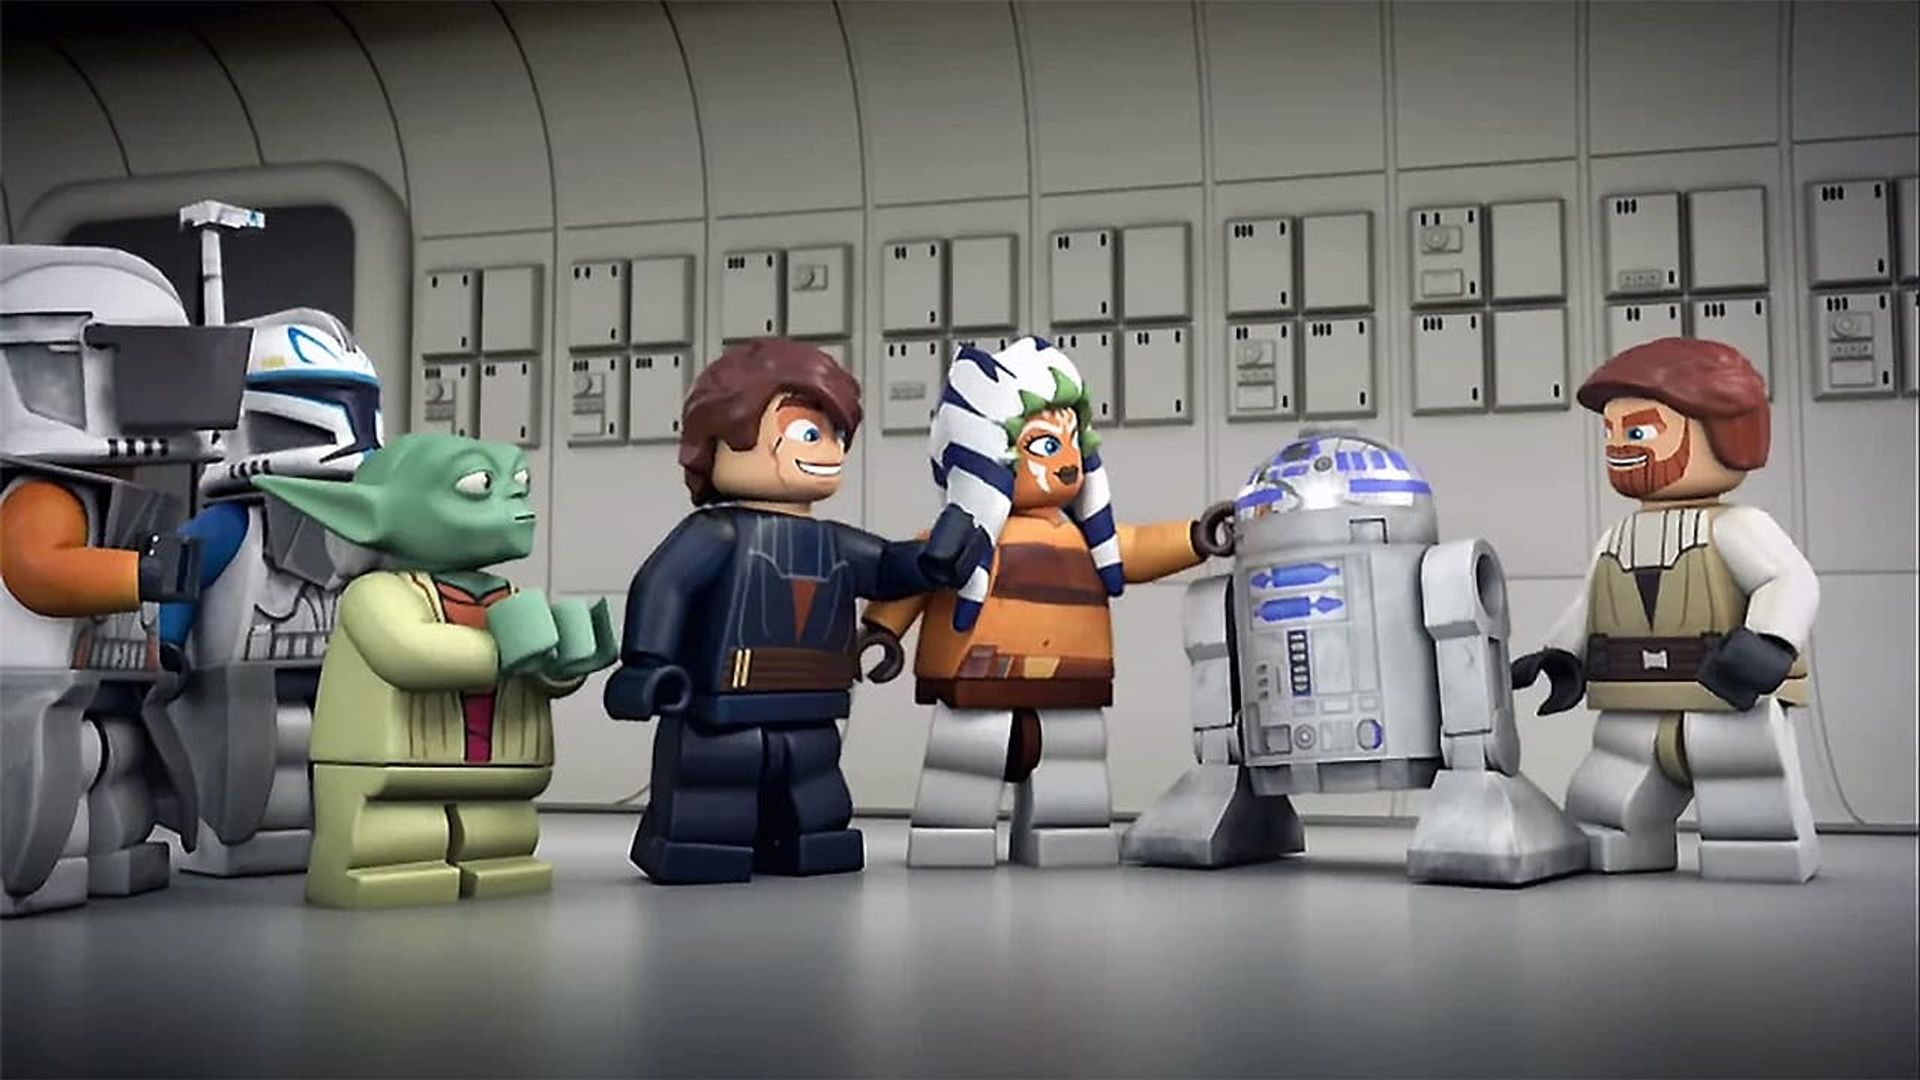 Lego Star Wars: The Quest for R2-D2 background